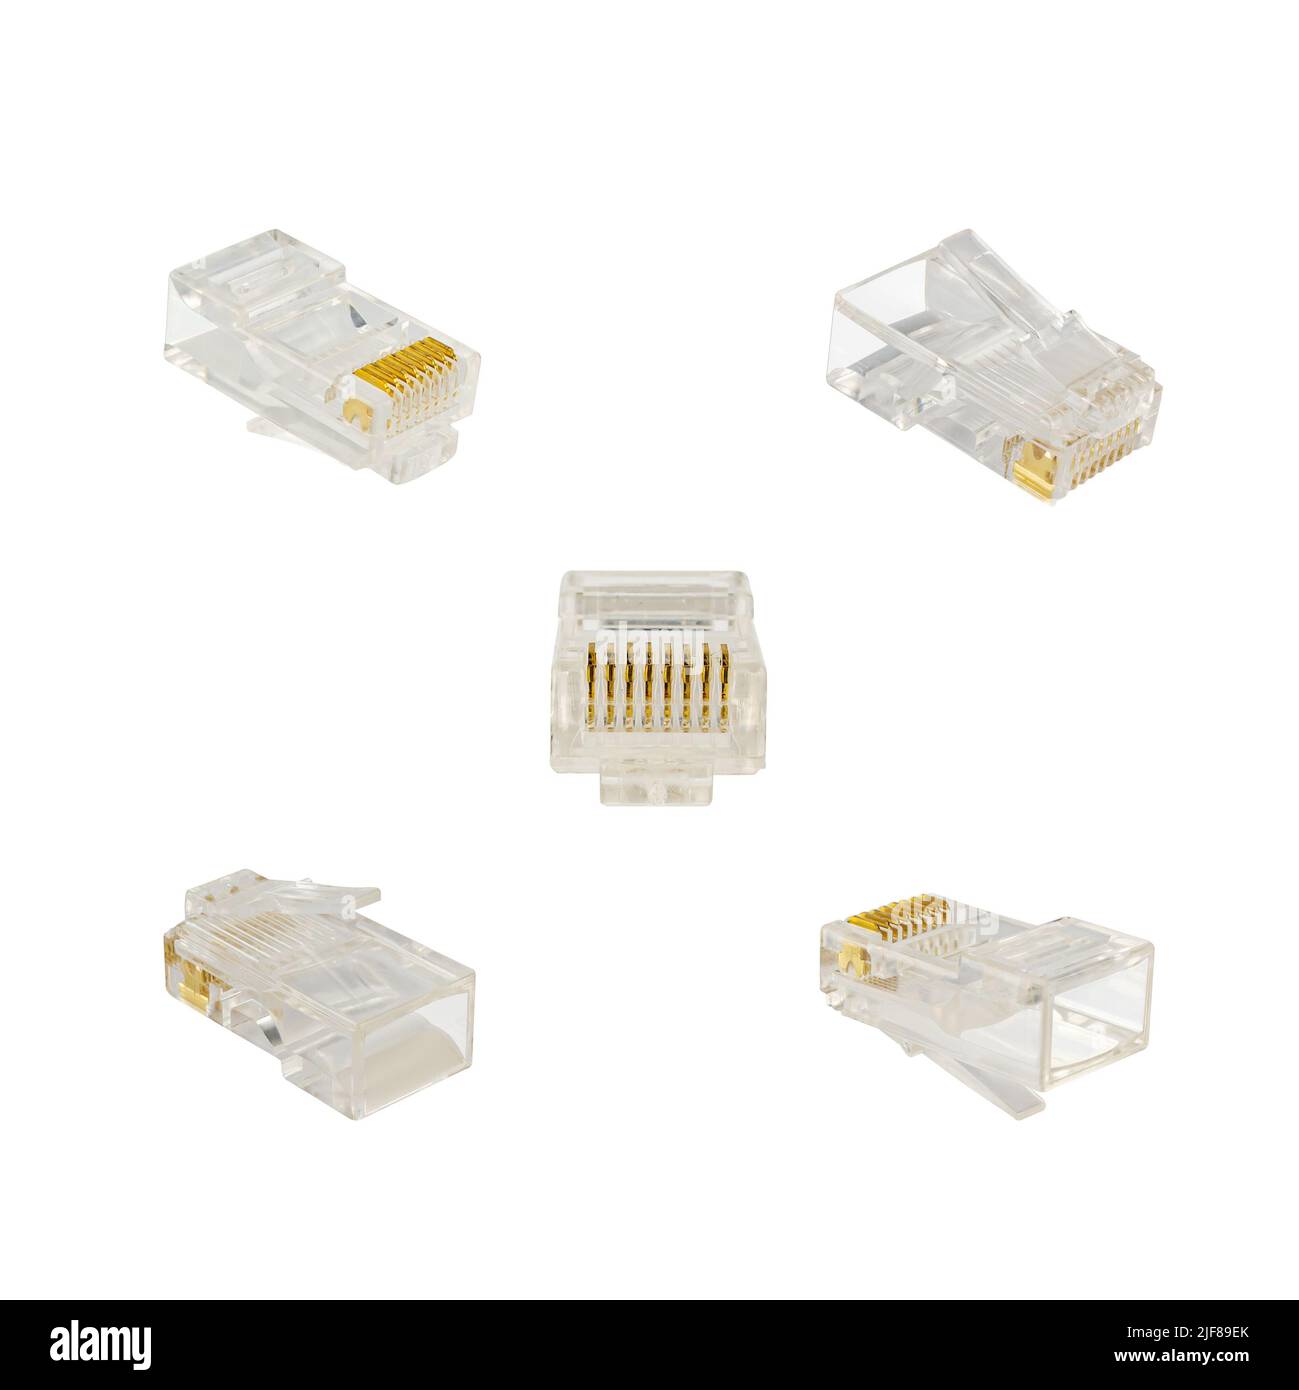 cable with RJ-45 connector, connector for wired internet connection on a white background Stock Photo